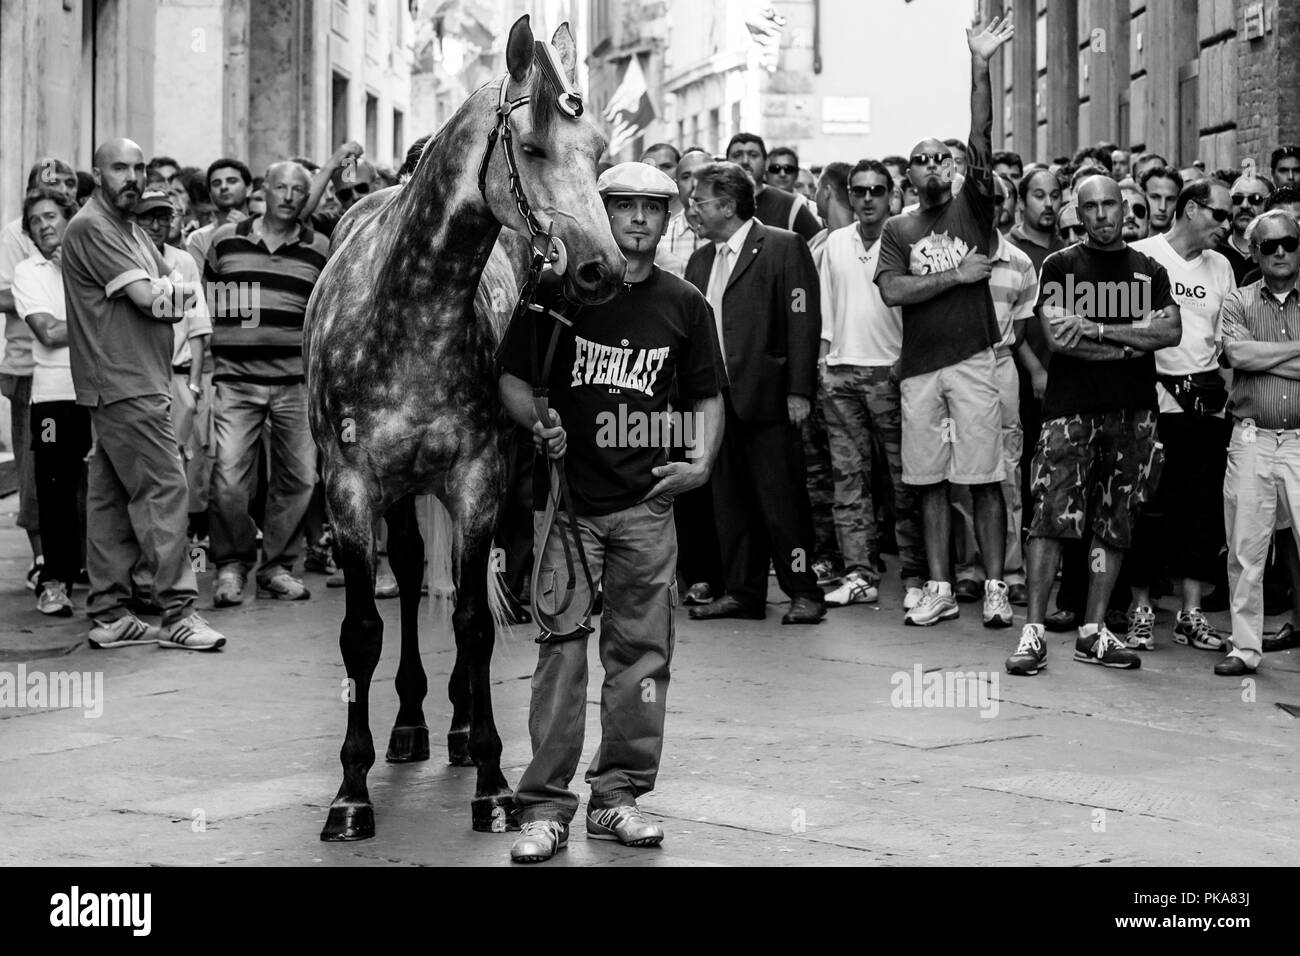 Members Of The Lupa Contrada Escort Their Horse Through The Streets To The Piazza Del Campo For One Of The Six Palio Trial Races, Siena, Italy Stock Photo